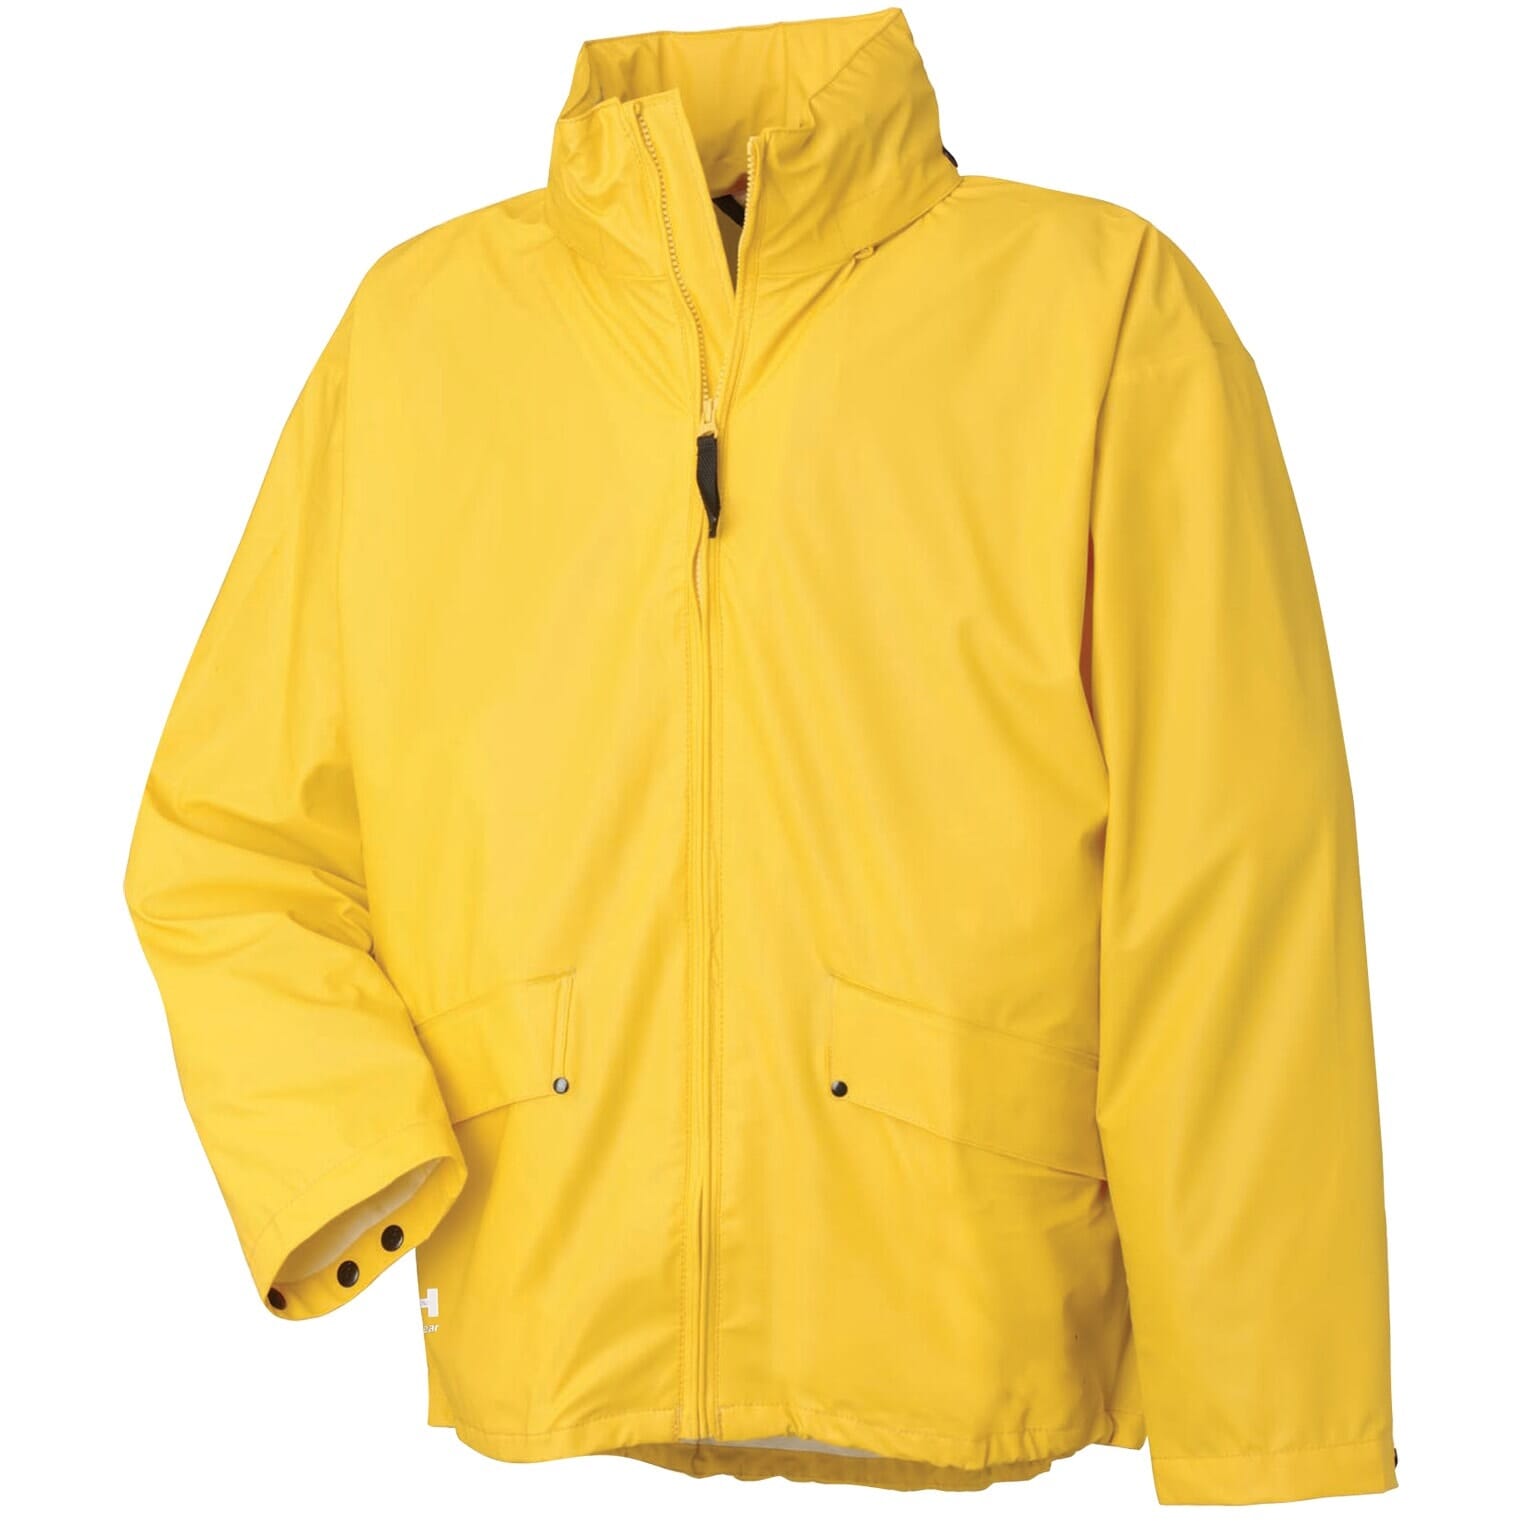 Pligt Aja Umoderne Helly Hansen Rain Jacket: Waterproof Voss Collection Men's, Multiple Sizes  and Colors Available - Western Safety